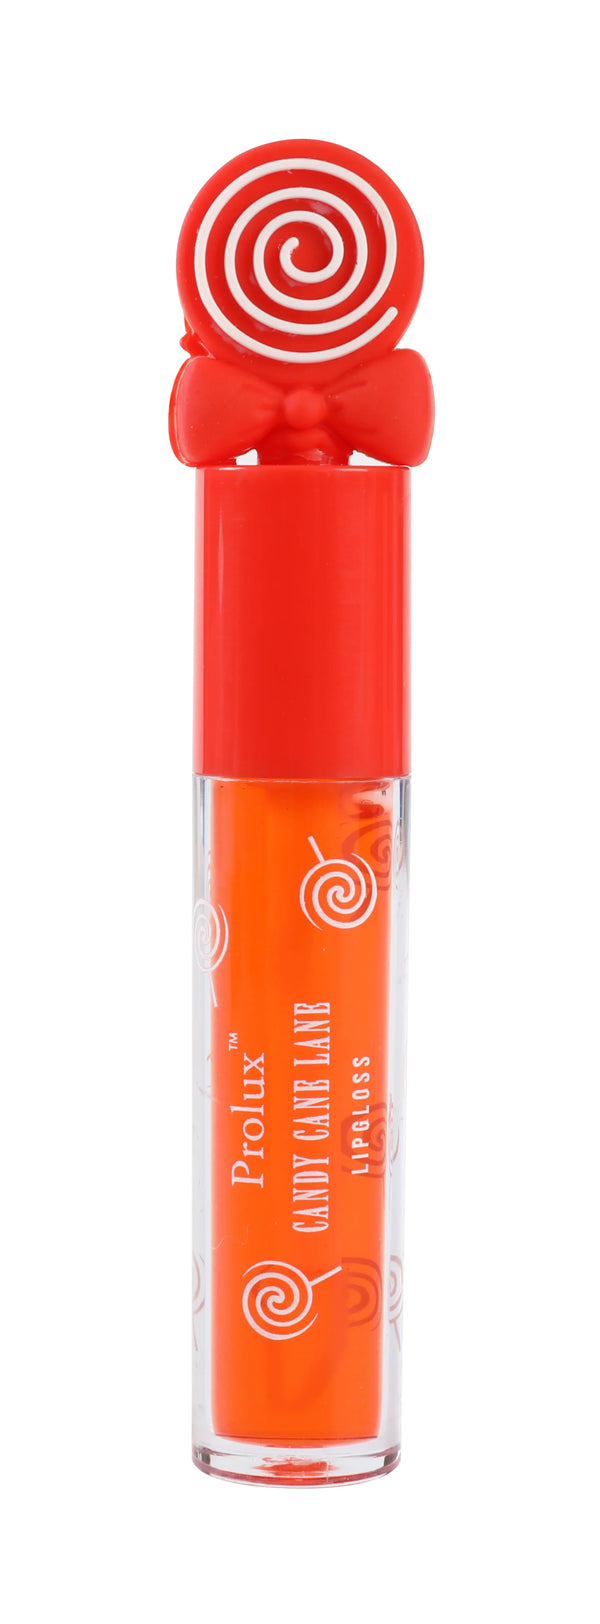 Prolux Candy Cane Gloss